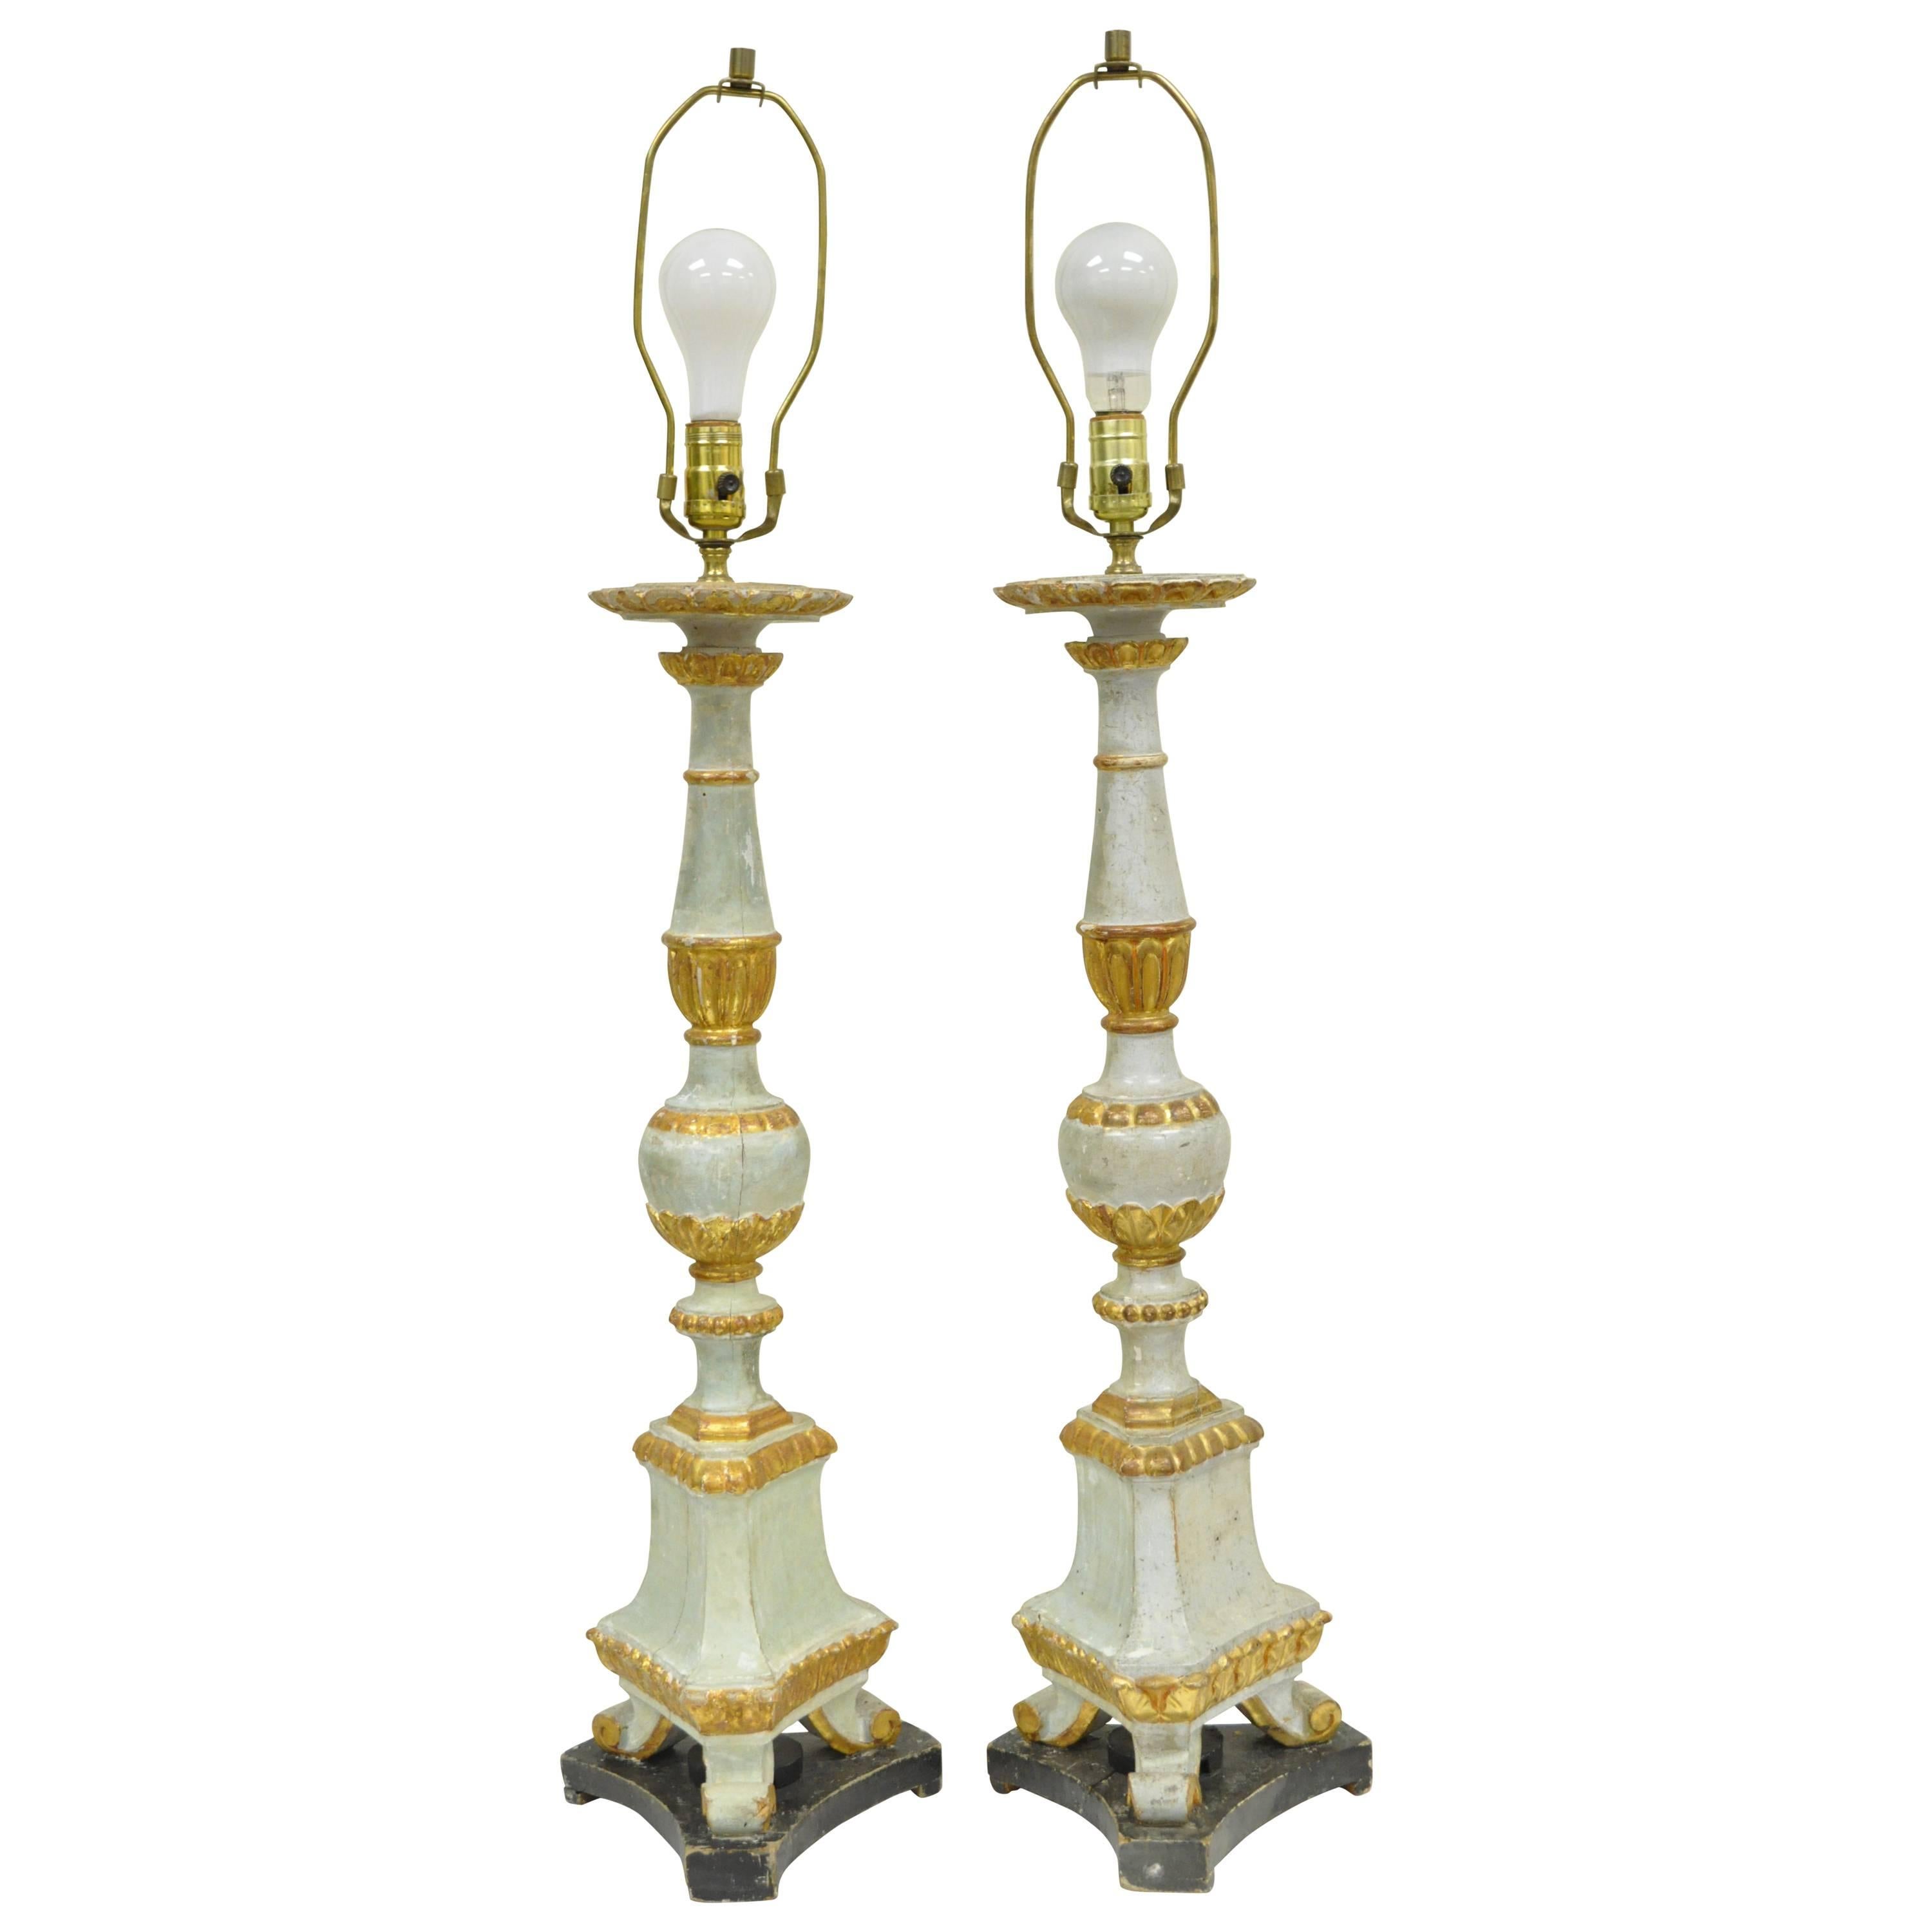 Pair of Early 20th Century Italian Hand-Carved Giltwood Neoclassical Table Lamps For Sale